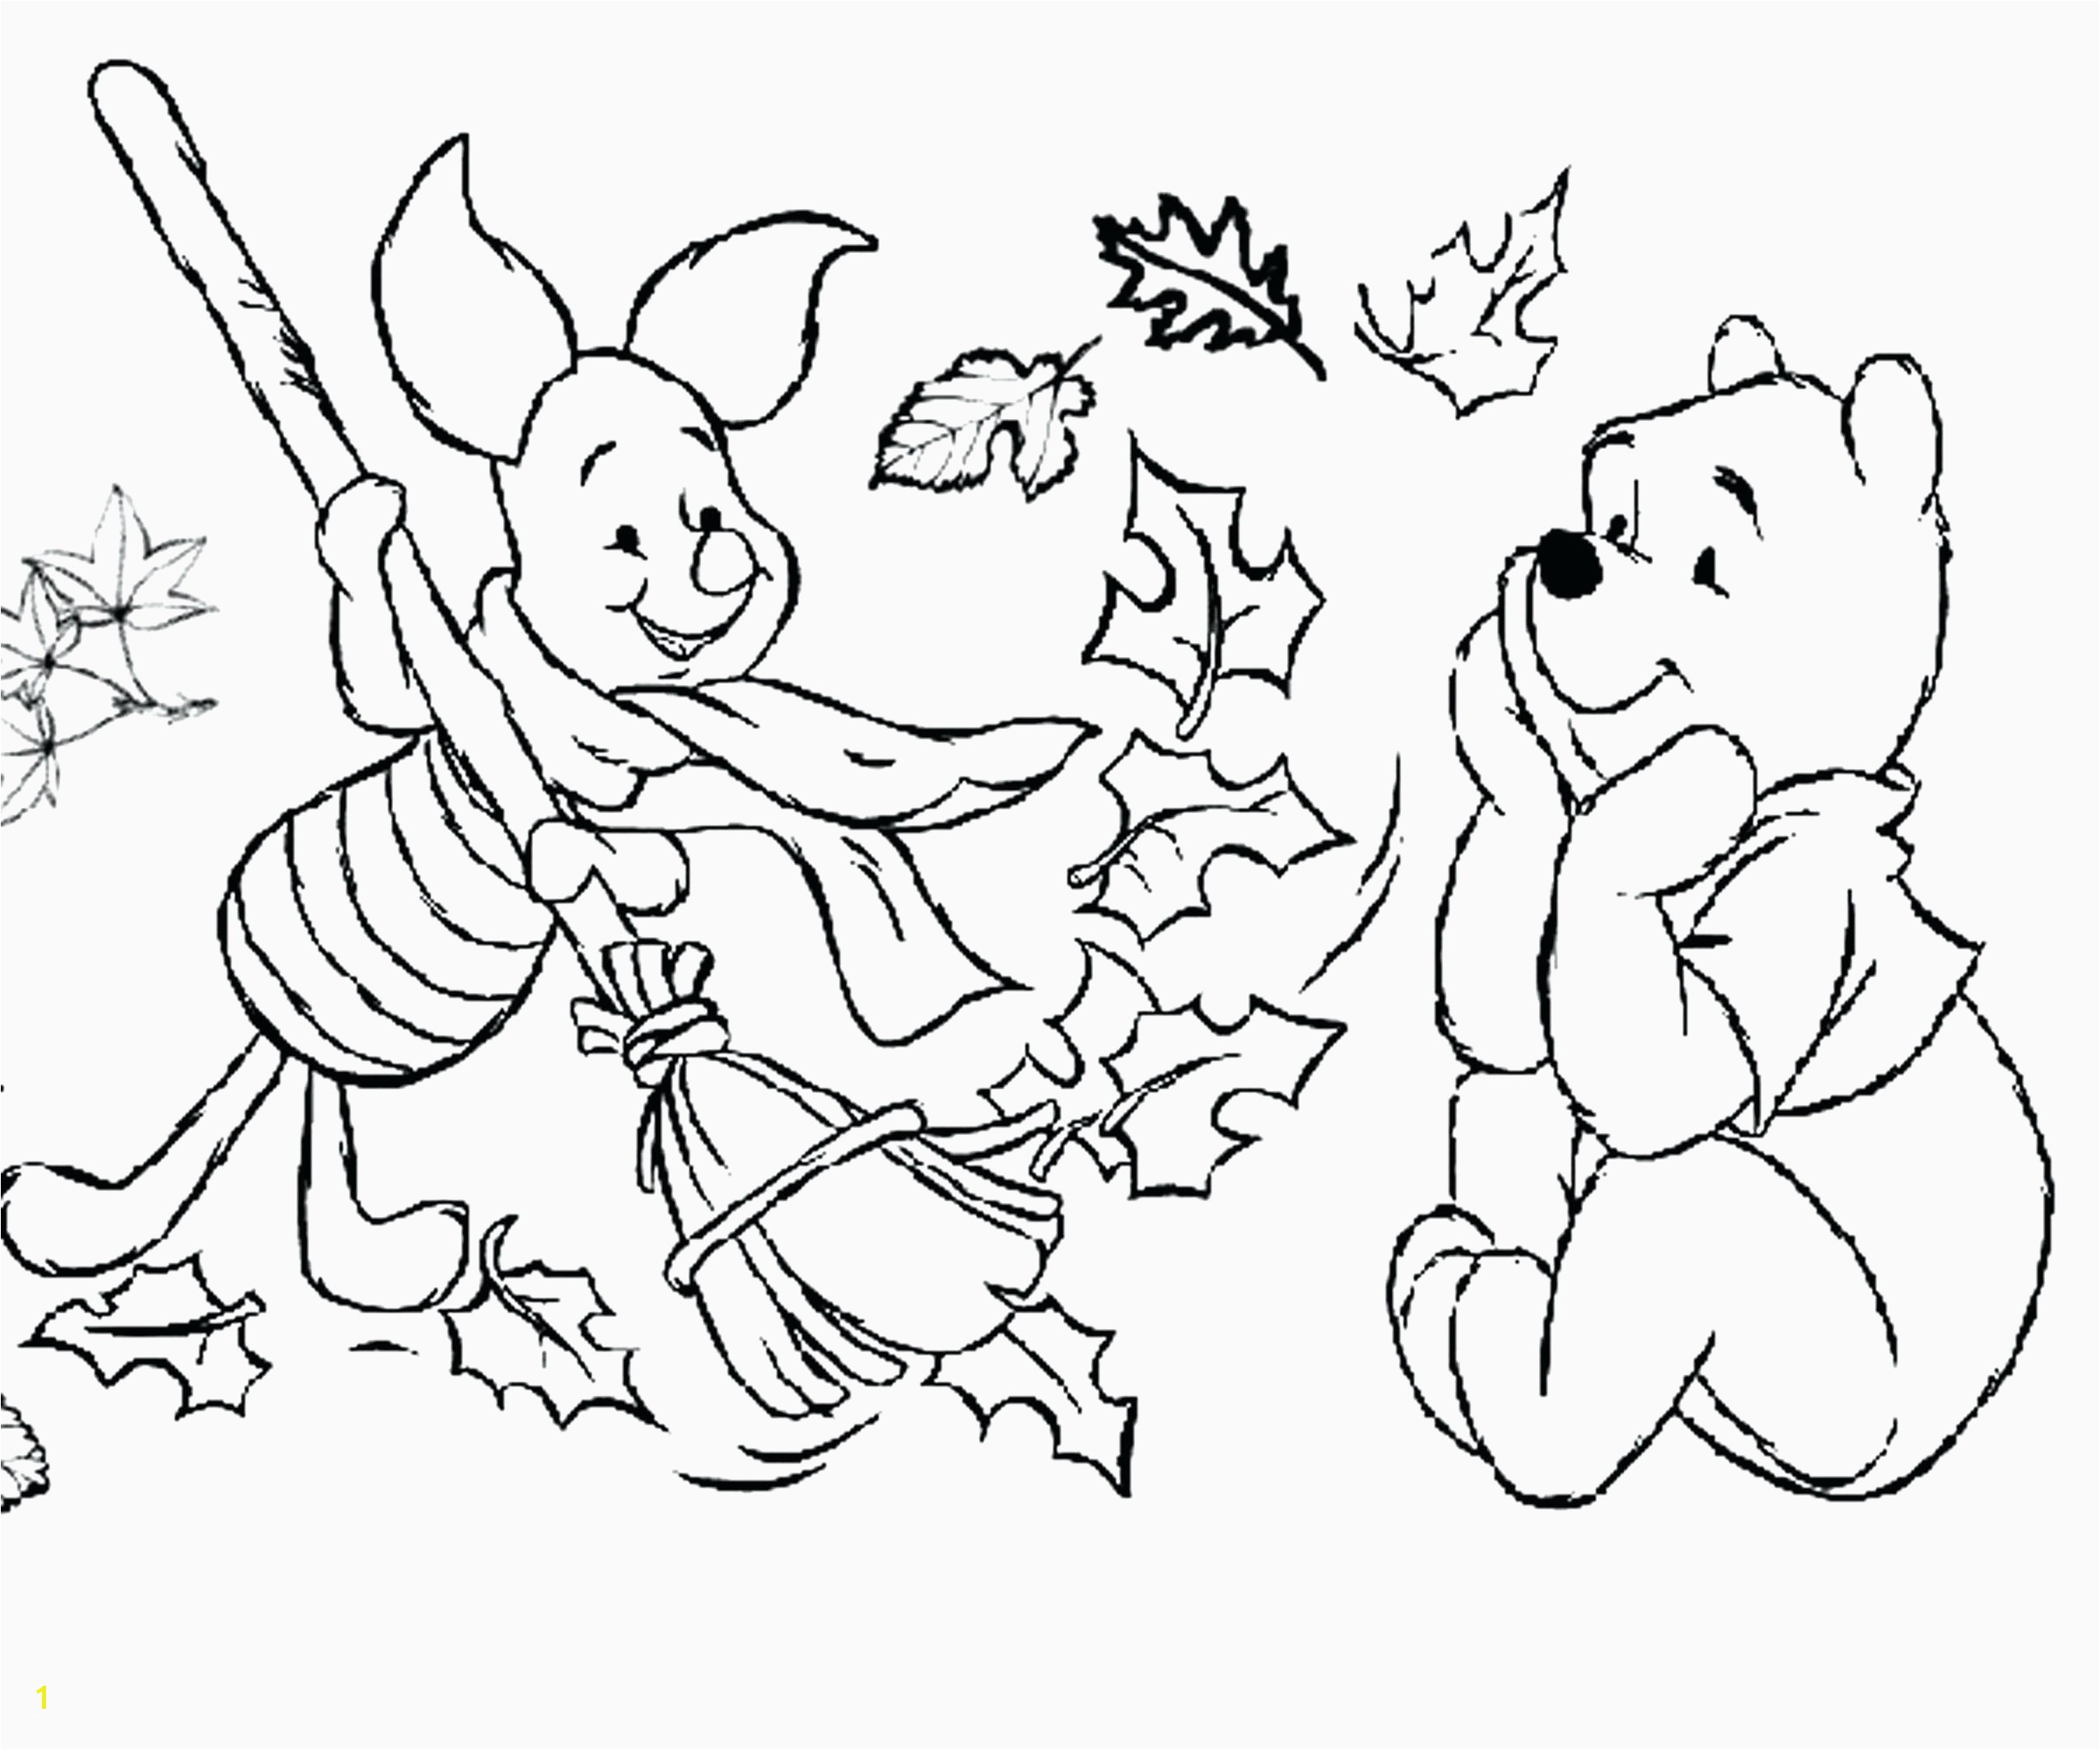 Liberty Kids Coloring Pages Elf Coloring Pages for Kids Coloring Pages